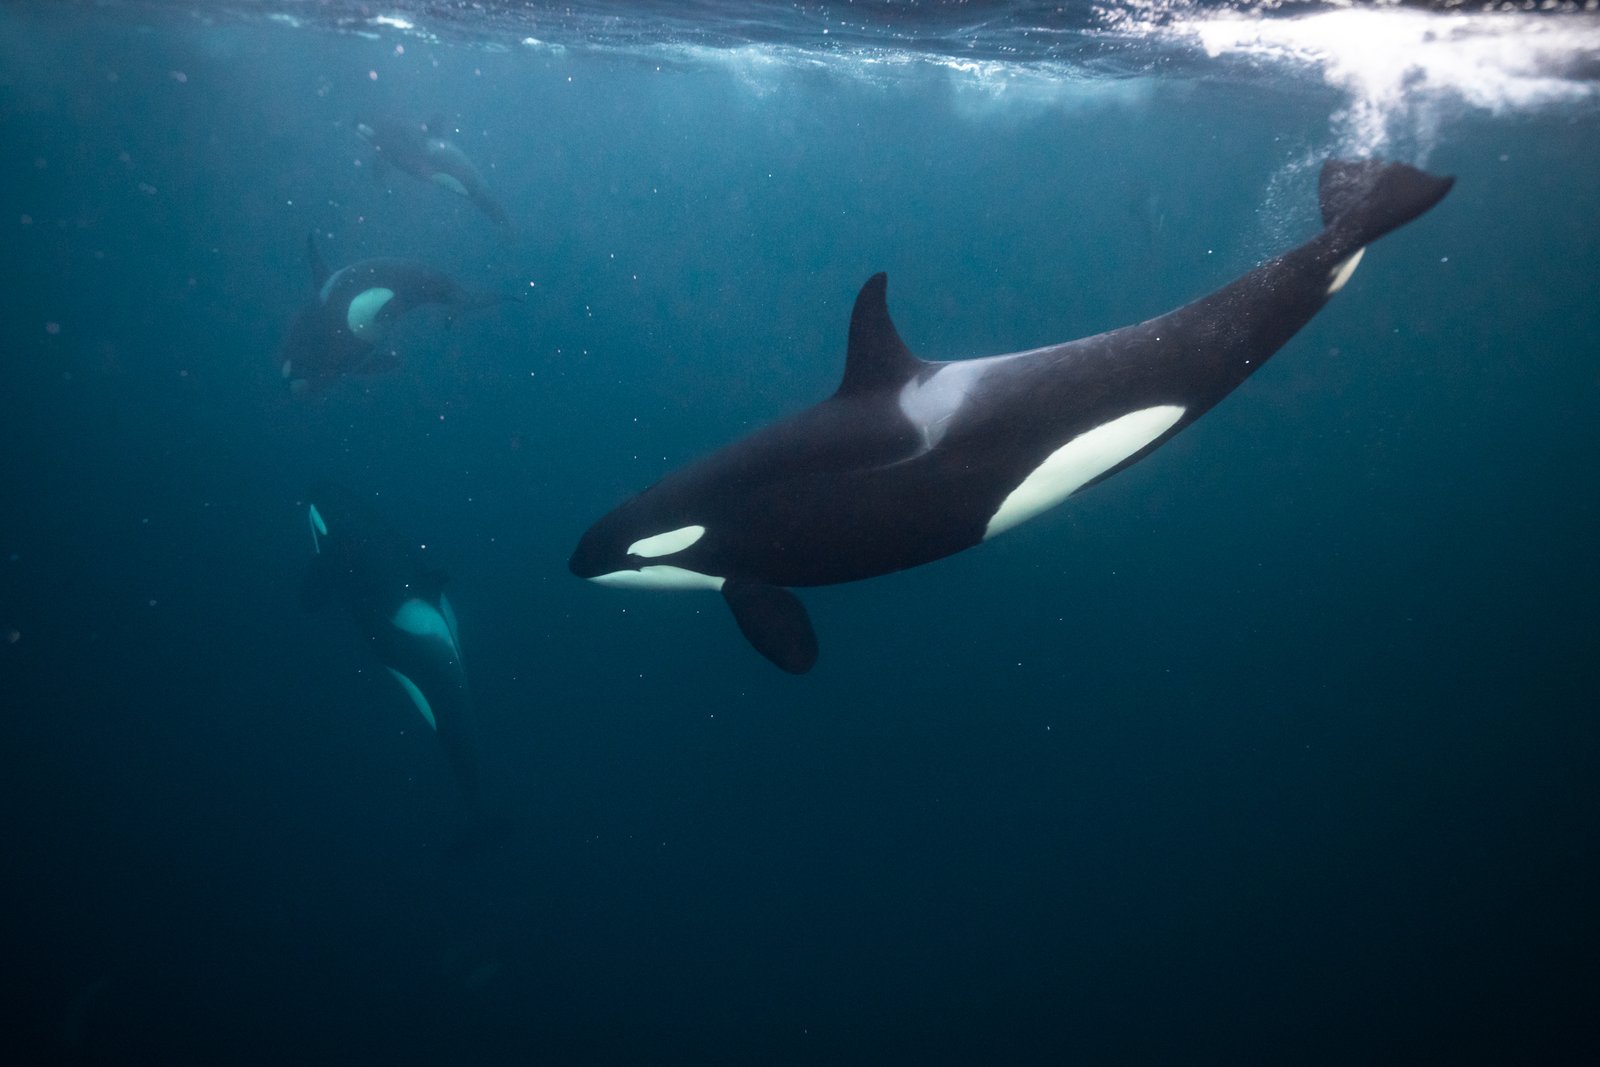 killerwhale underwater orca expedition travel